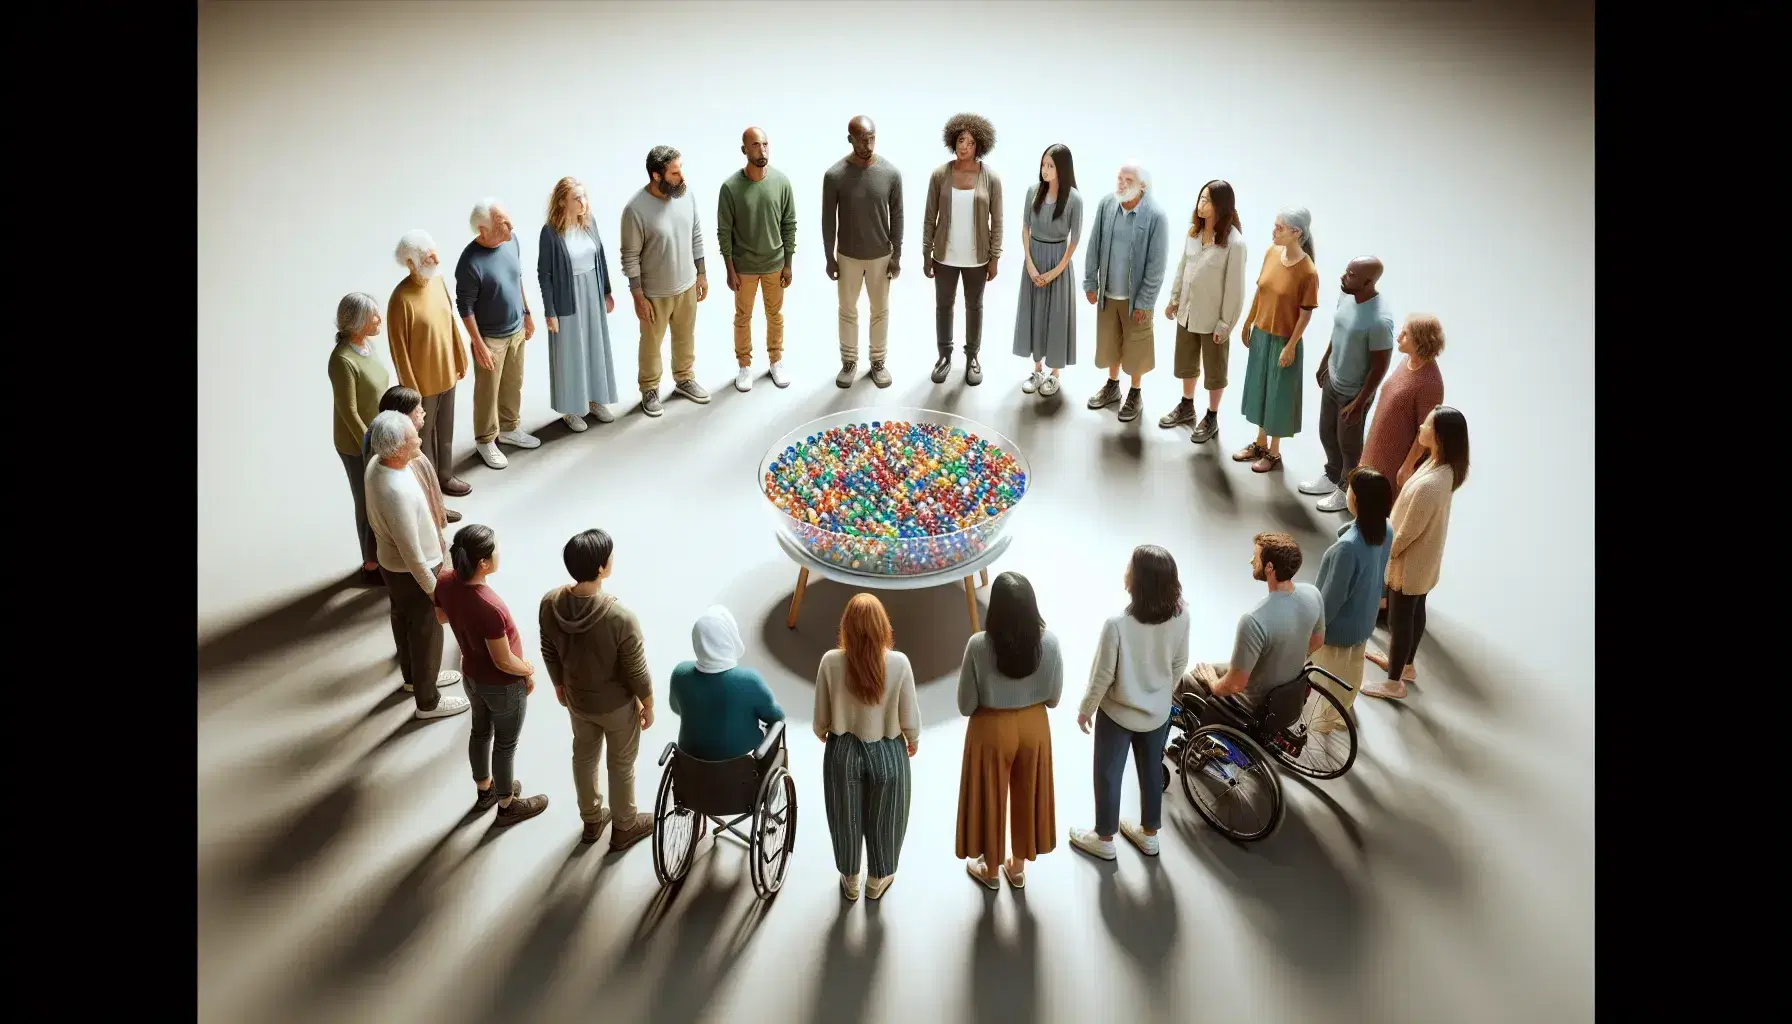 Multi-ethnic group of people in a circle, some on wheelchairs, around a table with bowl of colored marbles, neutral background.